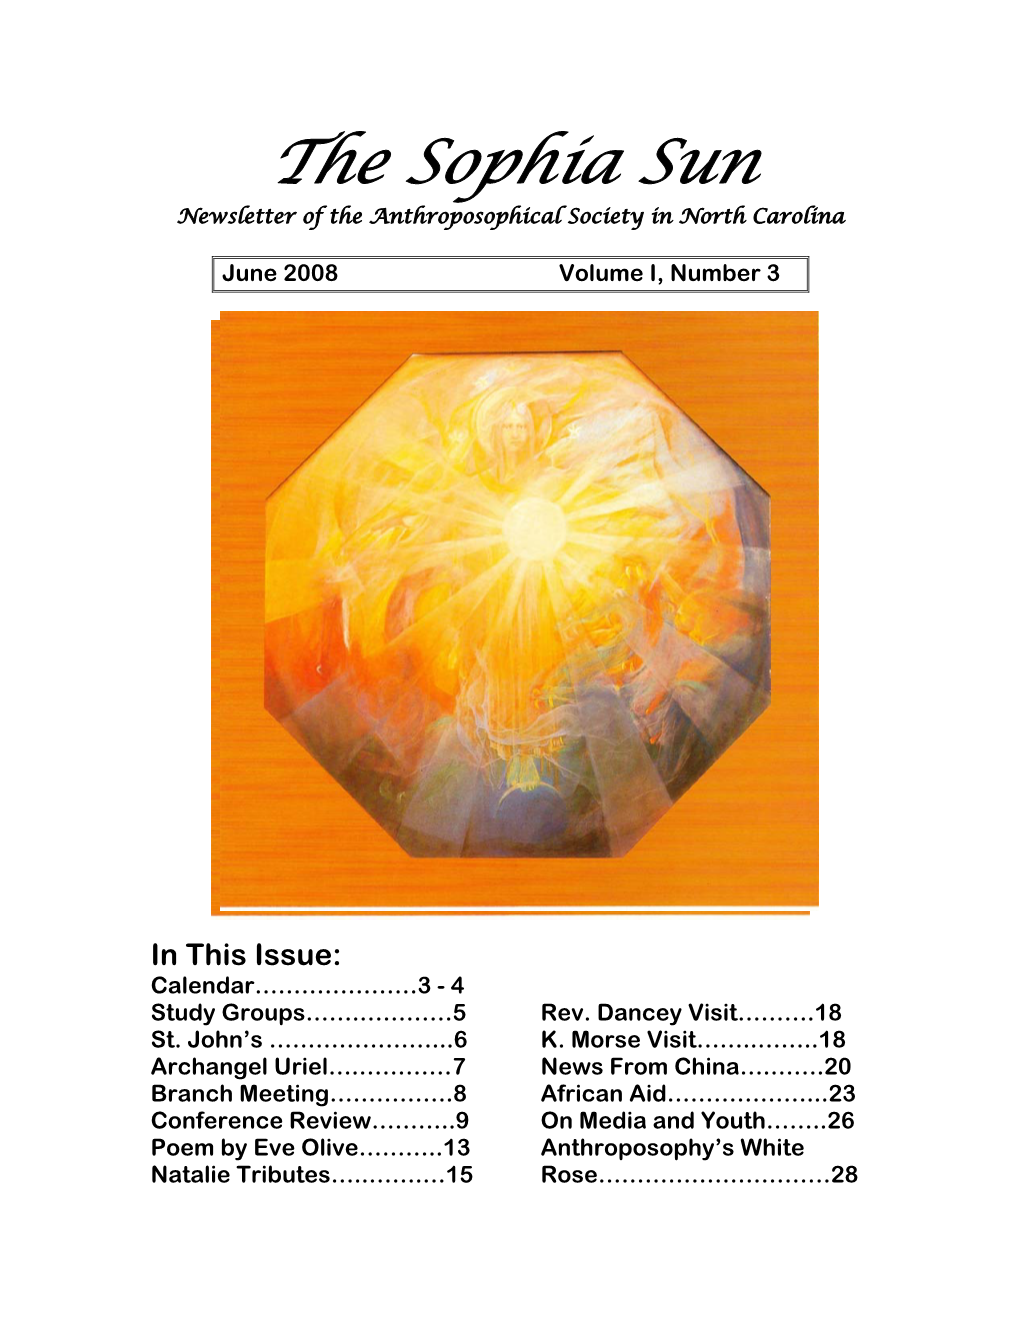 The Sophia Sun Newsletter of the Anthroposophical Society in North Carolina